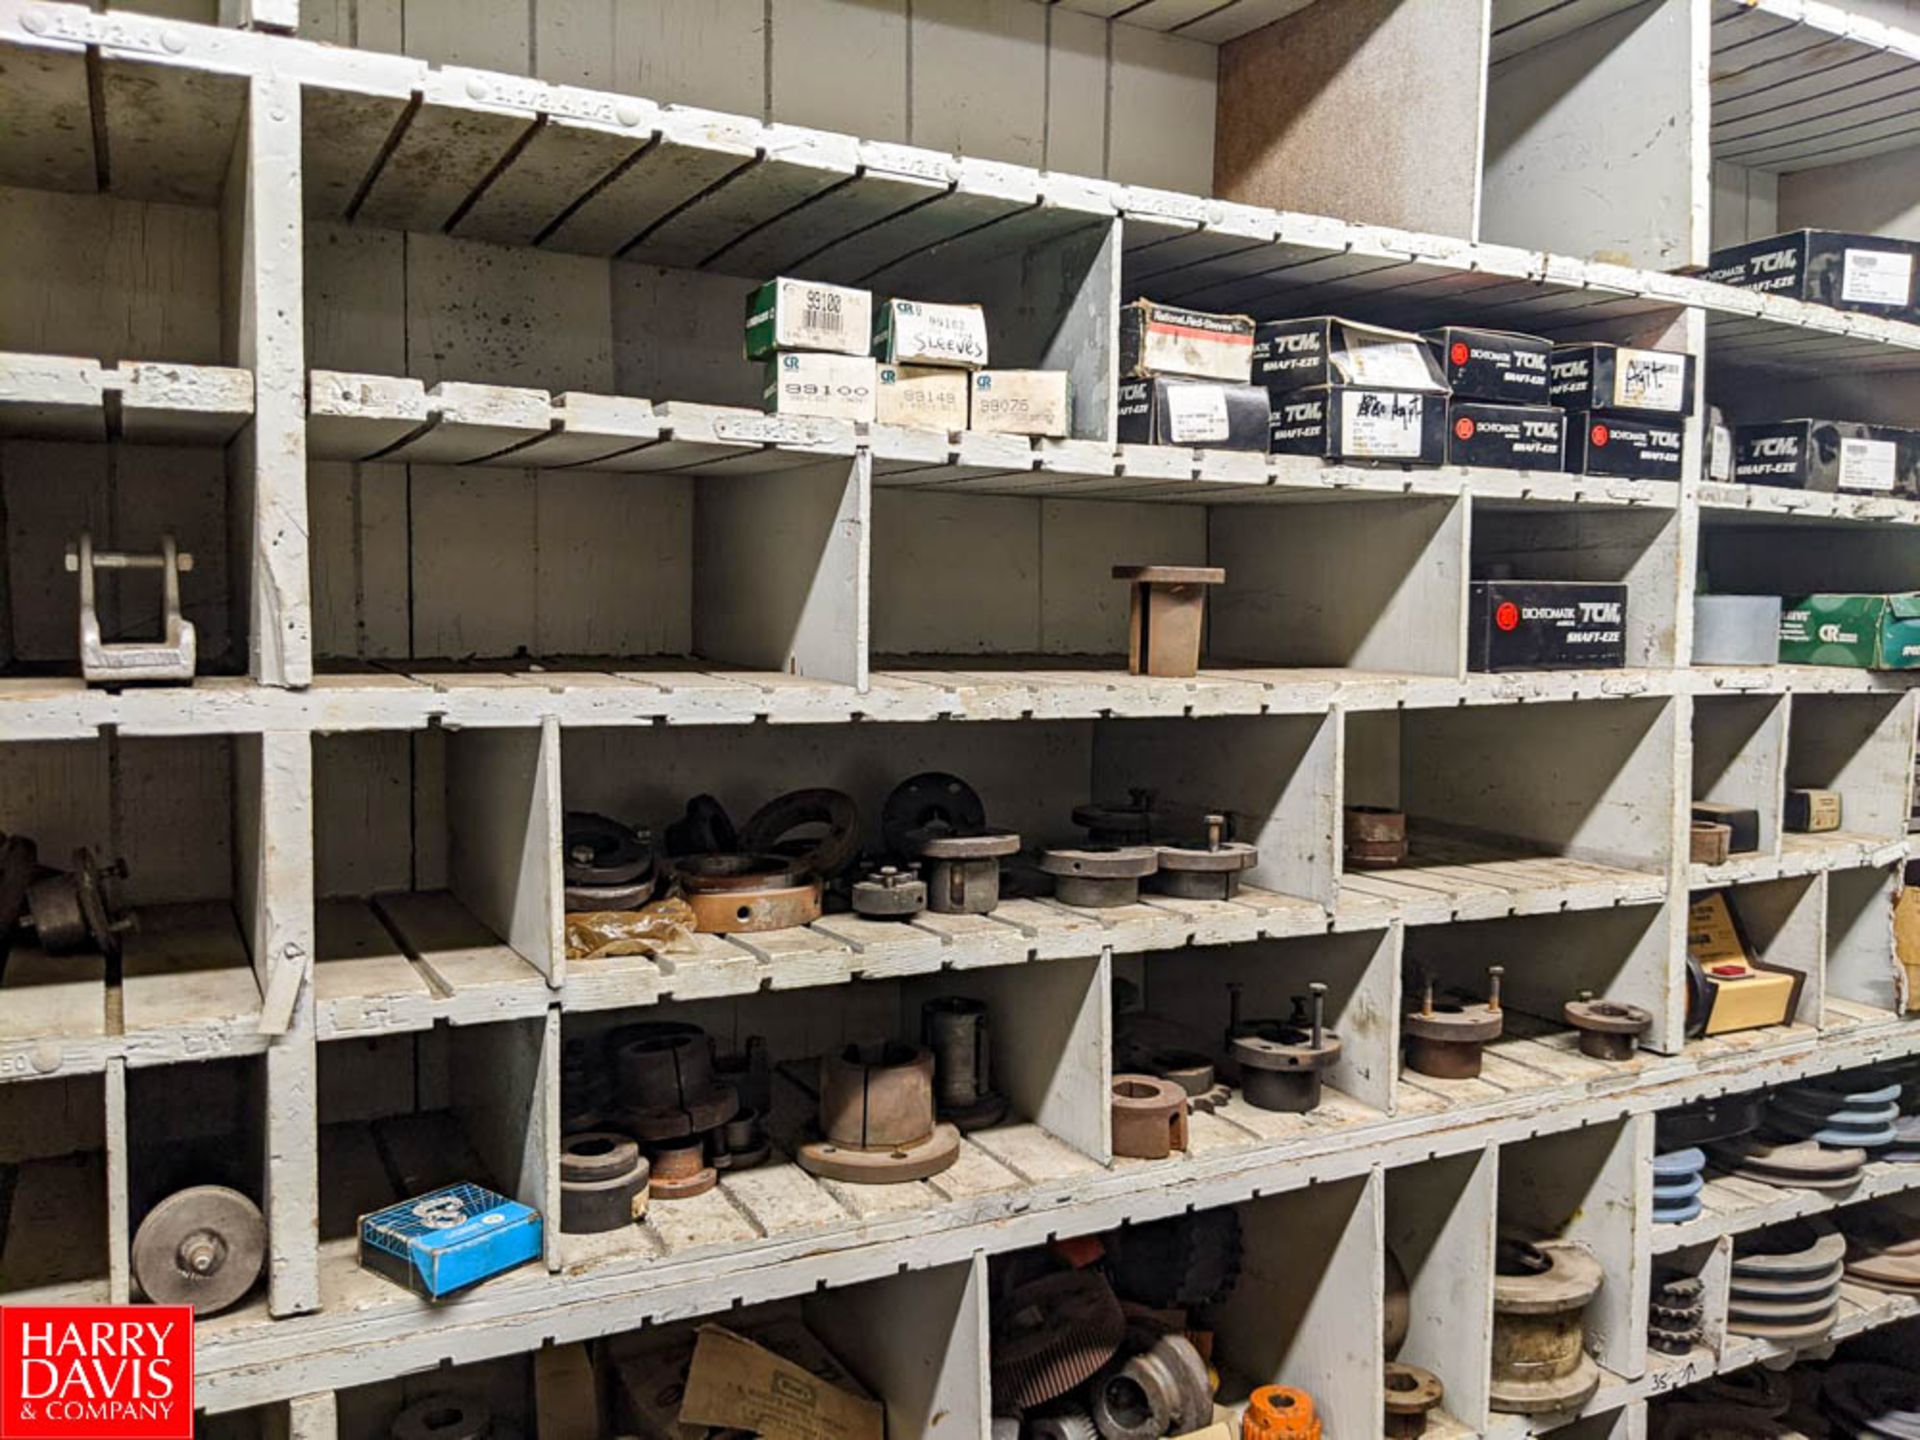 Remaining Contents of Parts Room Row to Include (6) Wooden Cubby Storage Shelves, LoveJoy Chucks, - Image 9 of 12